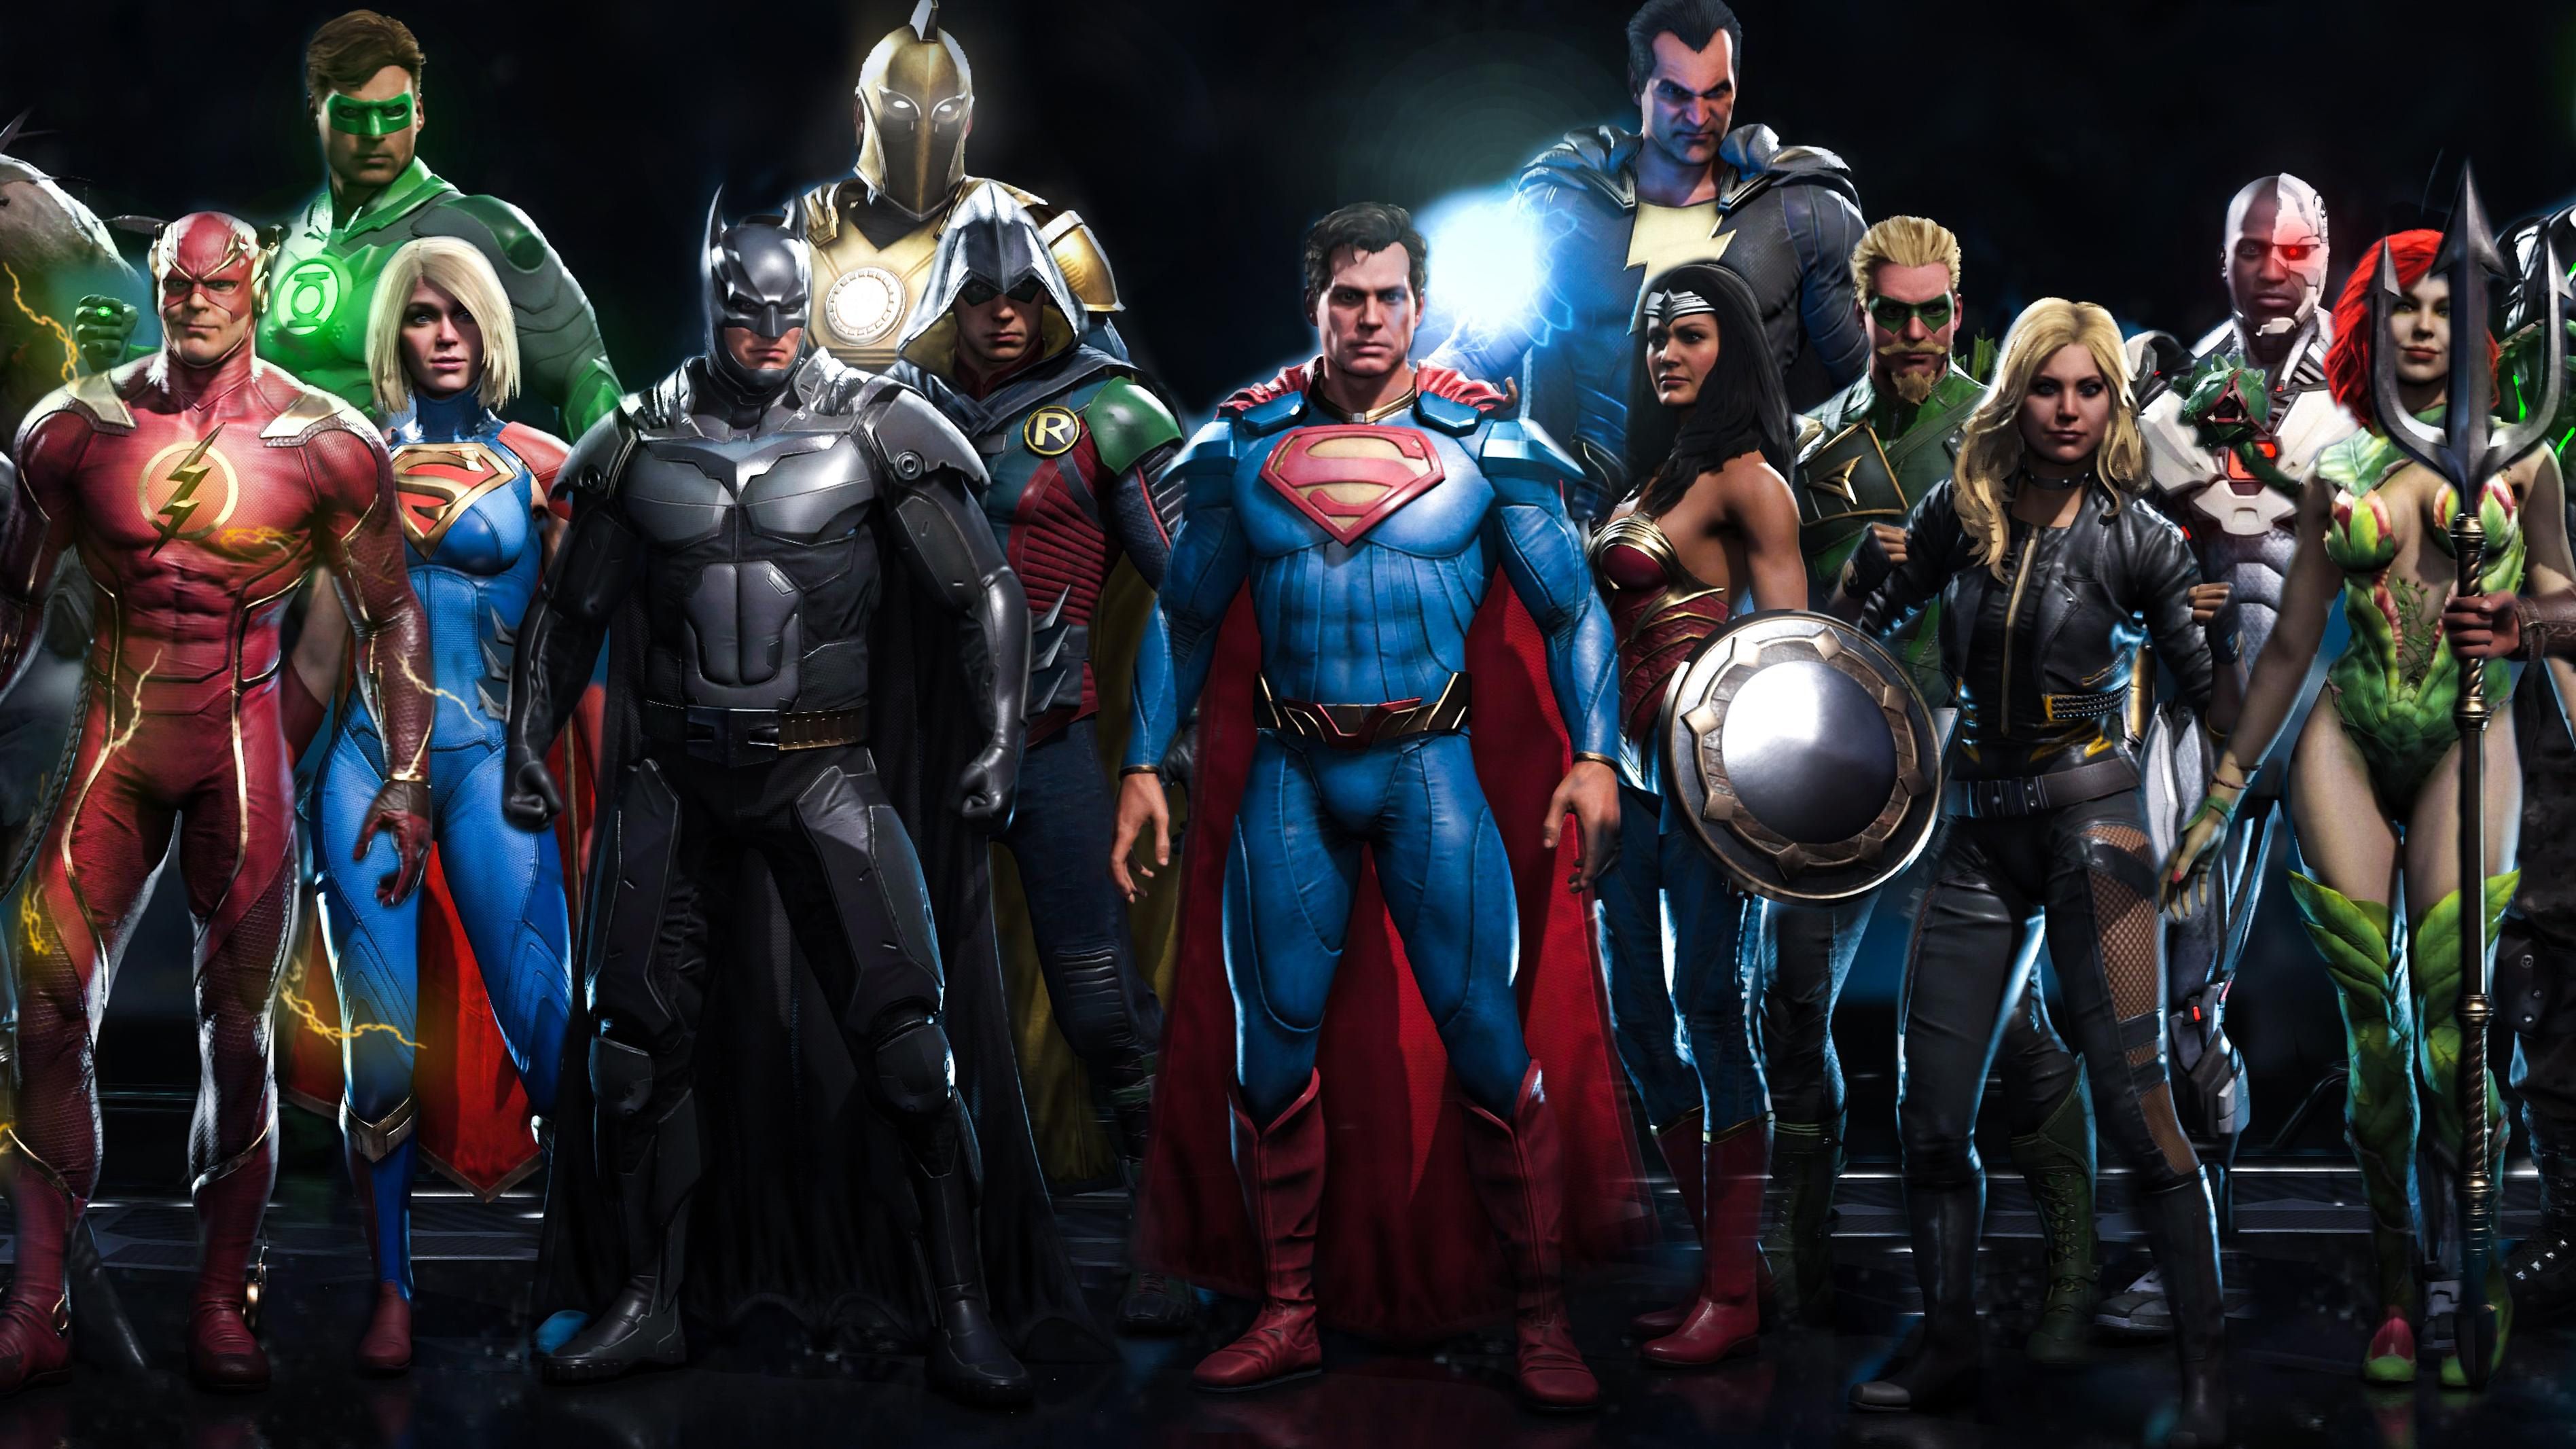 DC Superheroes 1680x1050 Resolution HD 4k Wallpaper, Image, Background, Photo and Picture